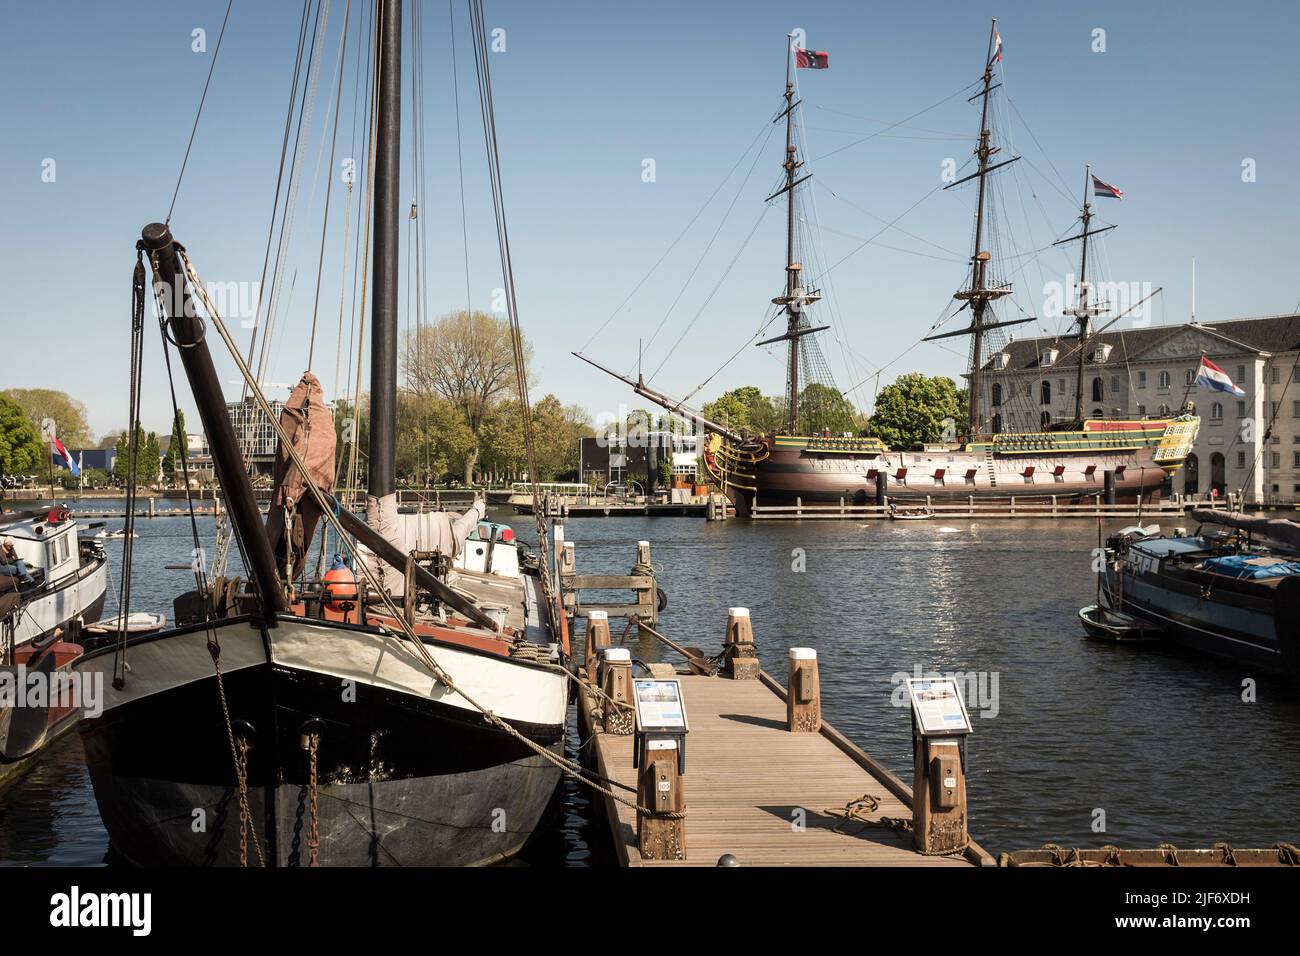 A replica of a Vereenigde Oostindische Compagnie, Dutch East India Company, ship, the Amsterdam, moored outside Het Scheepvaartmuseum, the National Maritime Museum, with a historic trading barge in the foreground, the Netherlands, in Amsterdam. Stock Photo